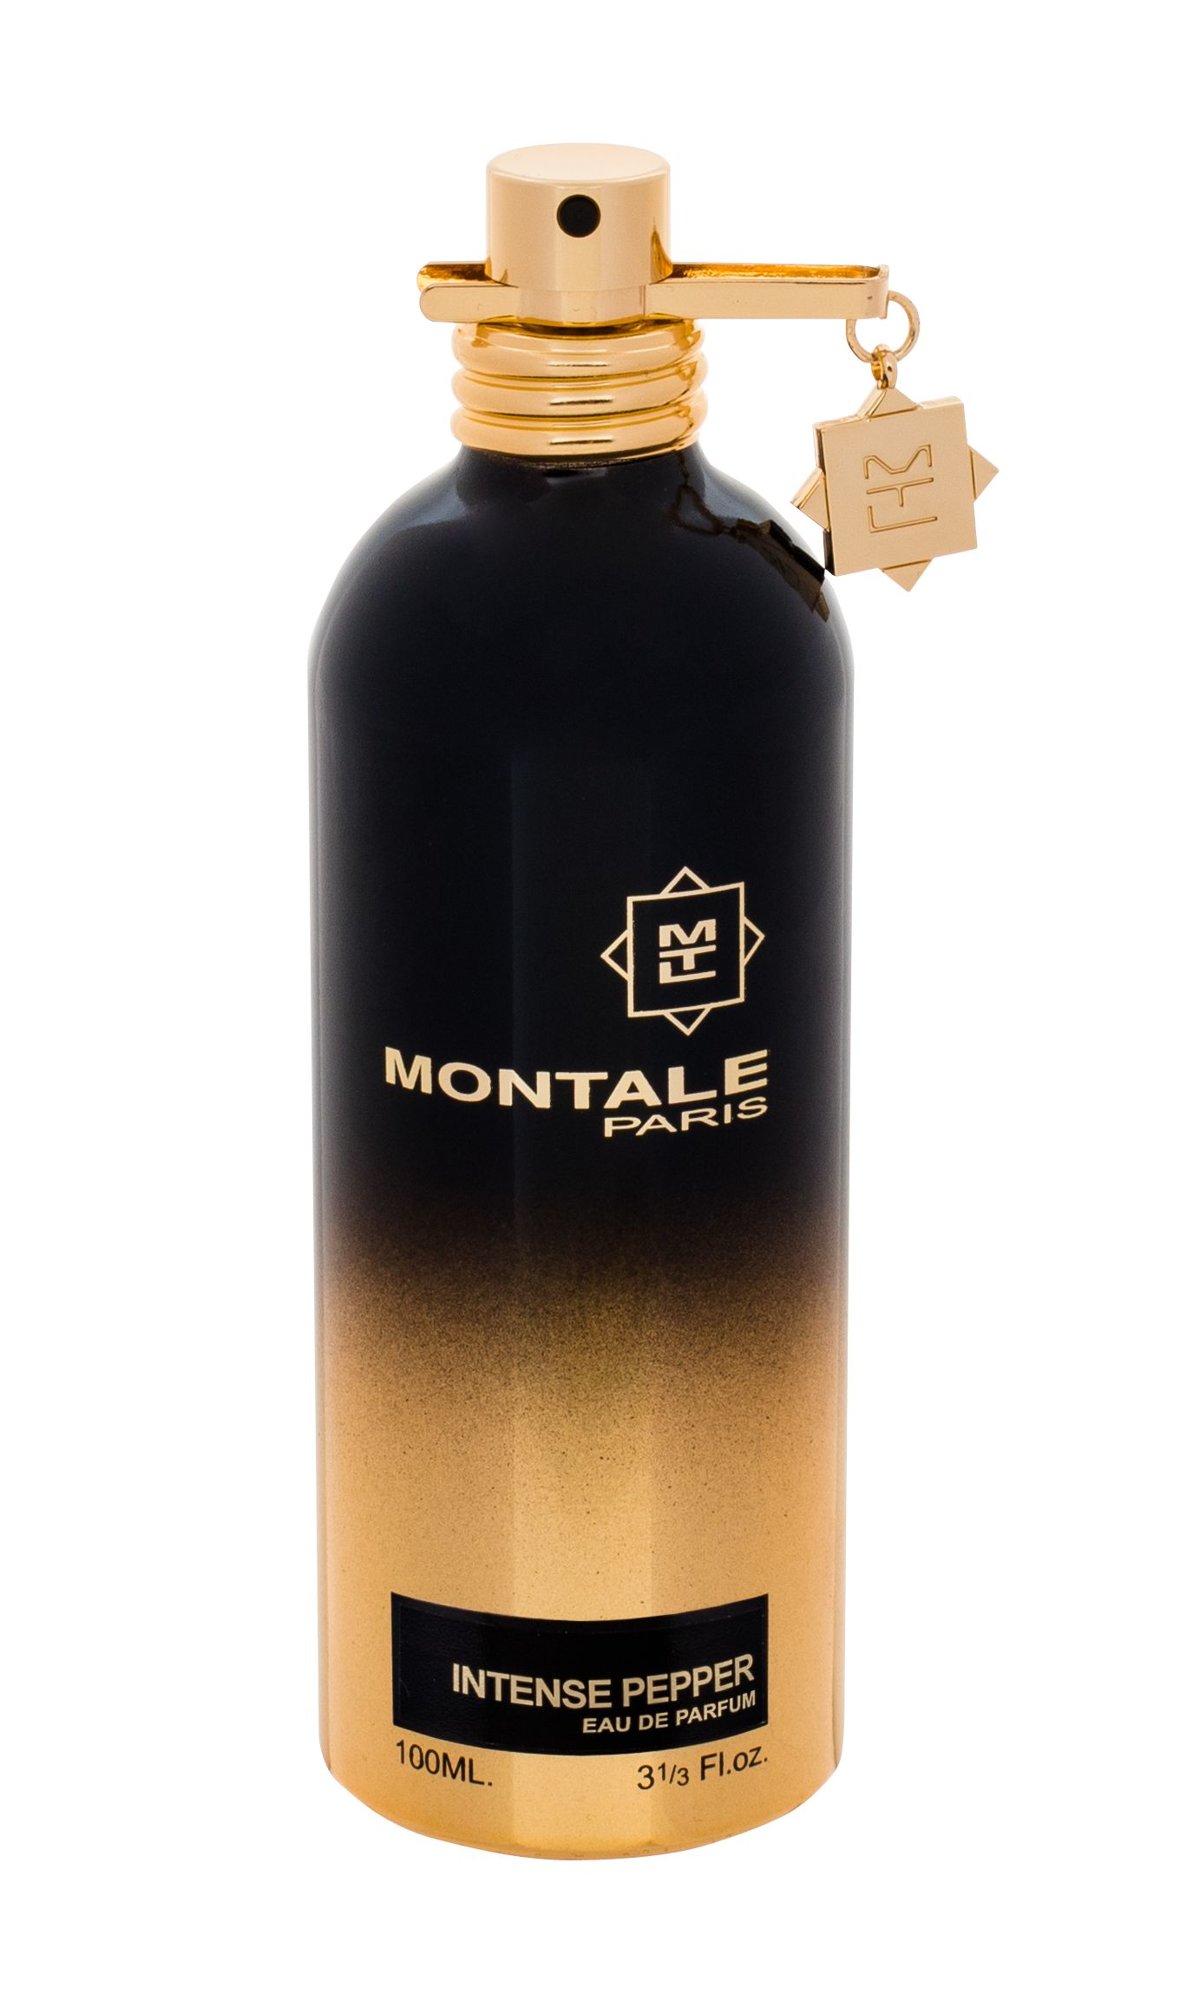 Vetyver montale. Духи Монталь intense Pepper. Montale Aoud Night, 100 ml. Montale Amber Musk EDP (100 мл). Montale Leather Patchouli.